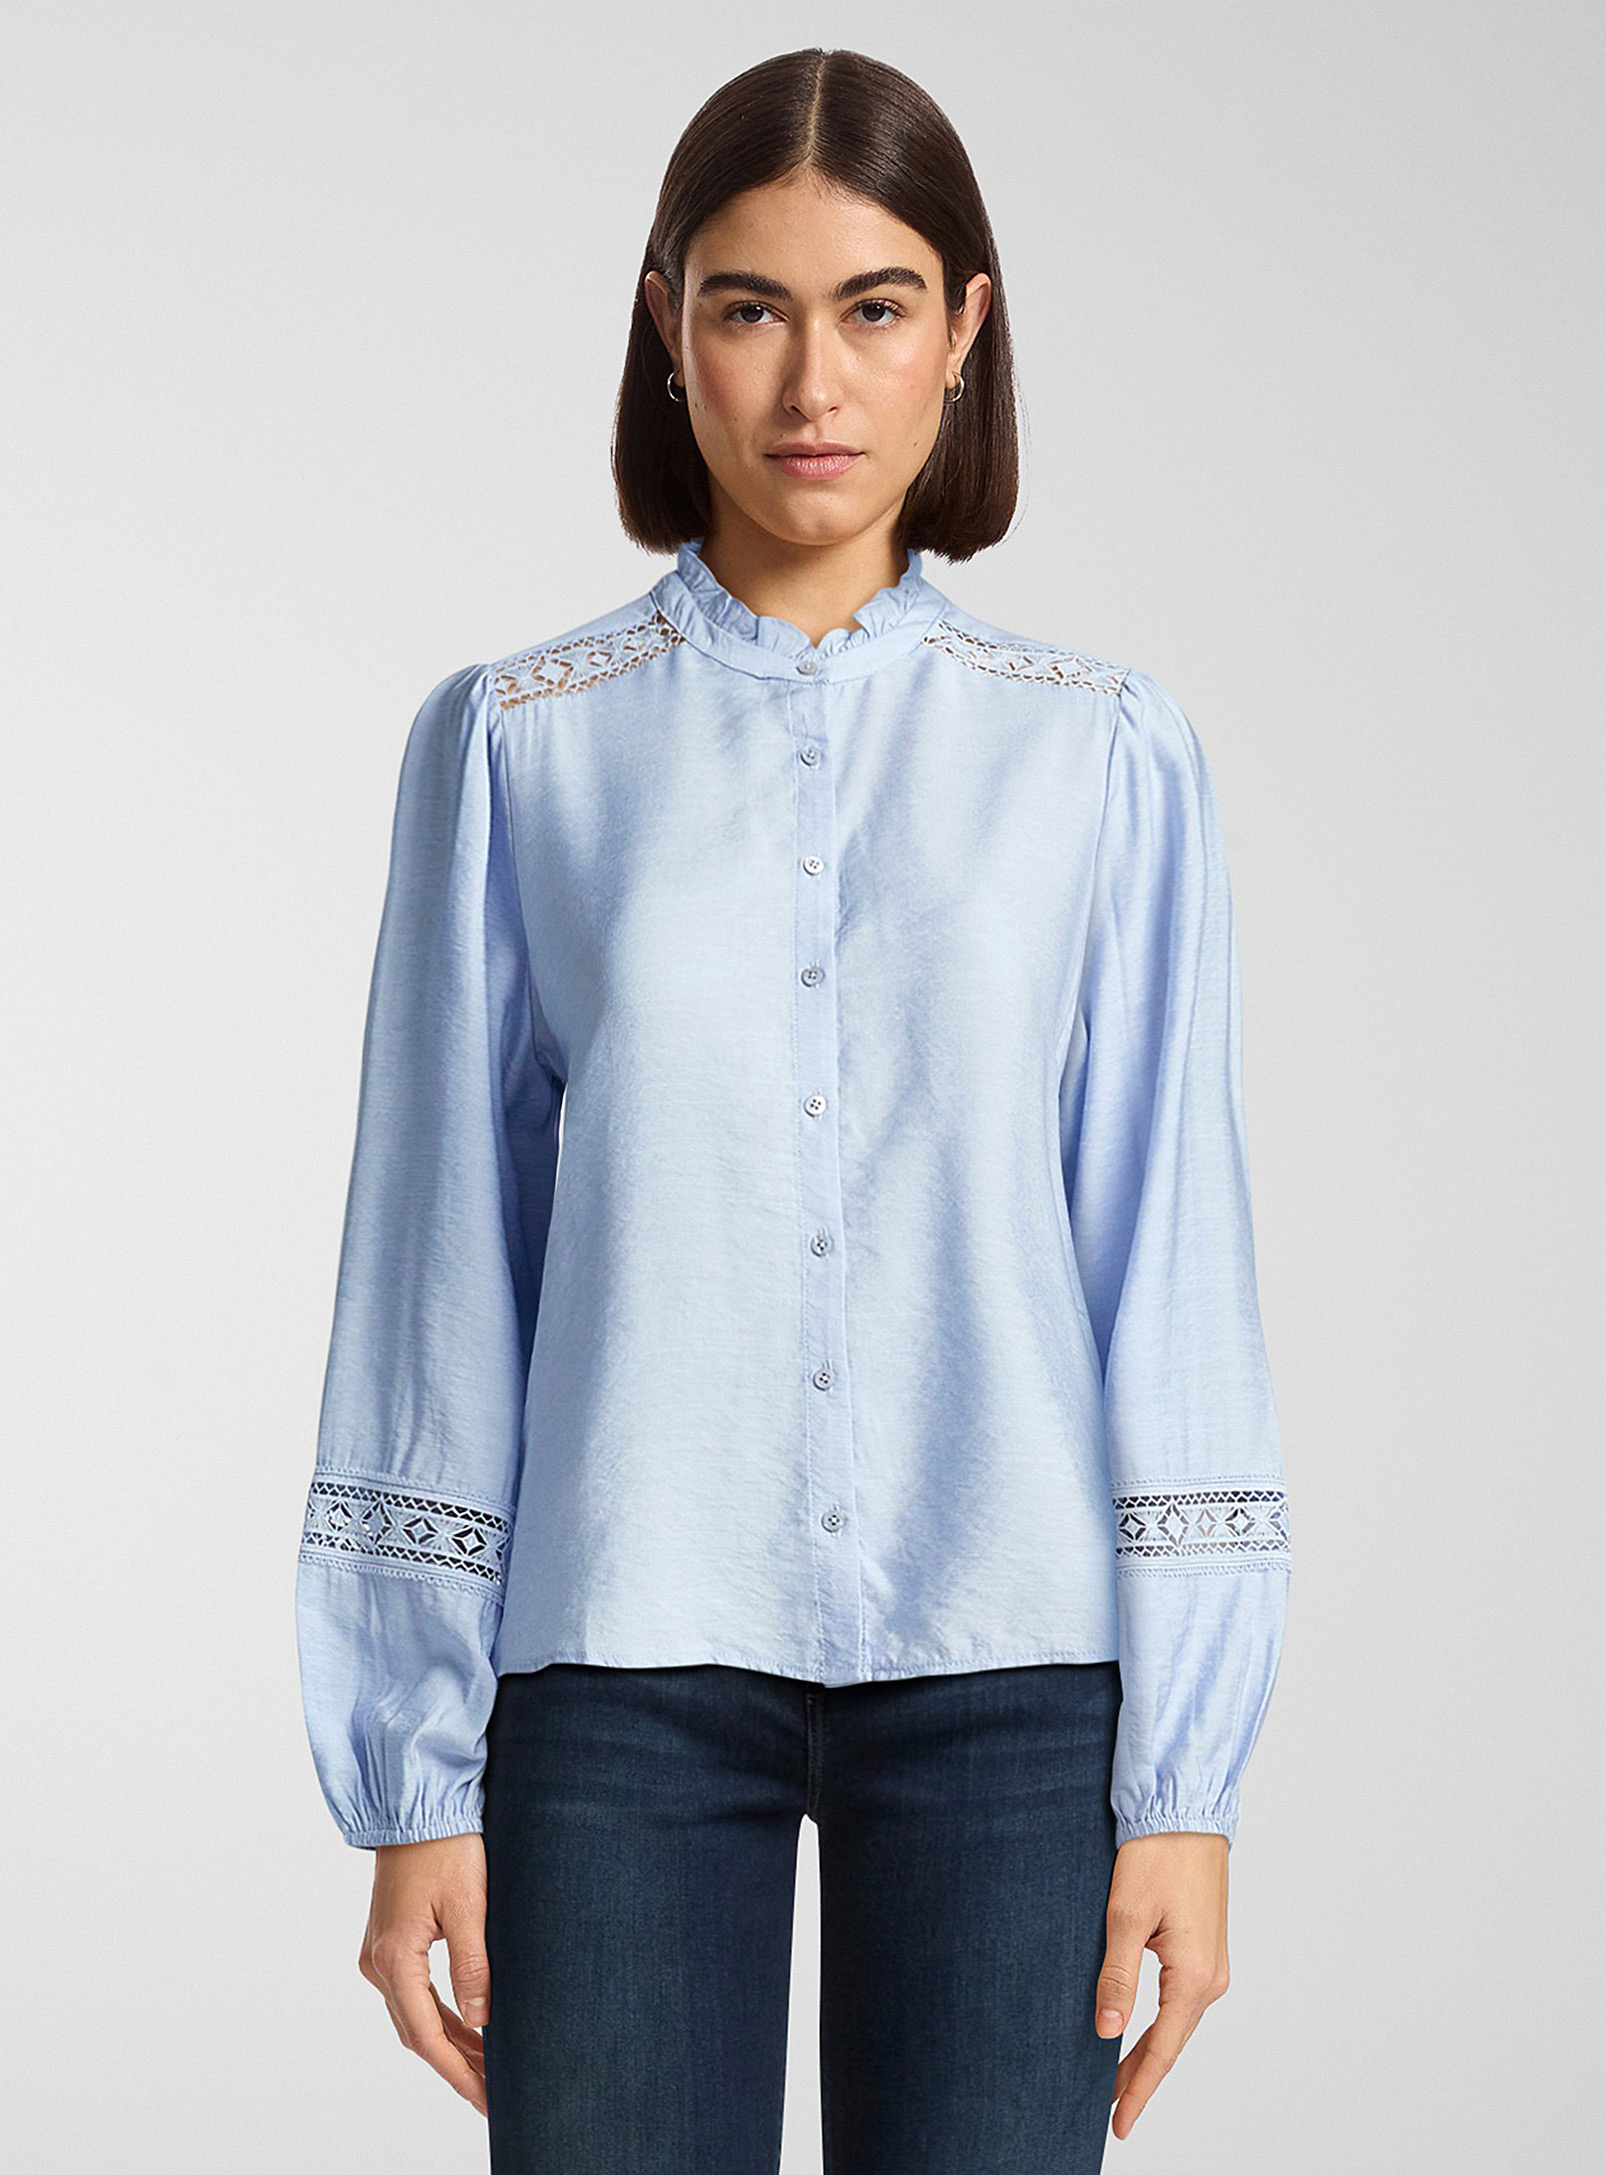 Contemporaine Crocheted Ribbons Shirt In Baby Blue